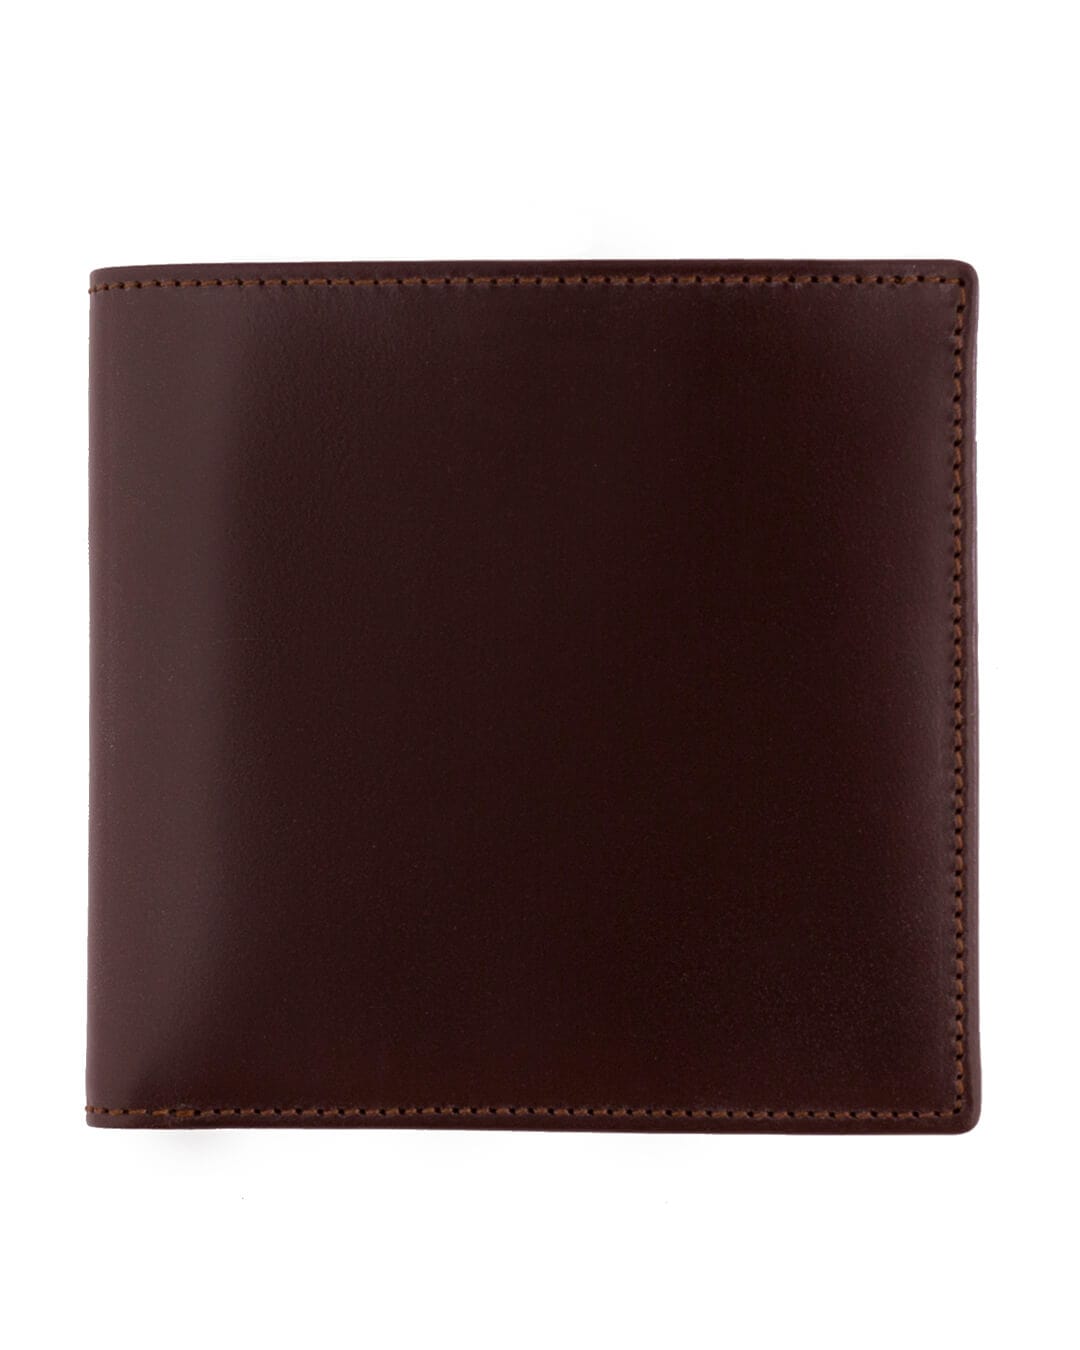 Cavesson&#39;s Wallets Cavesson&#39;s Brown And Orange Coin Wallet